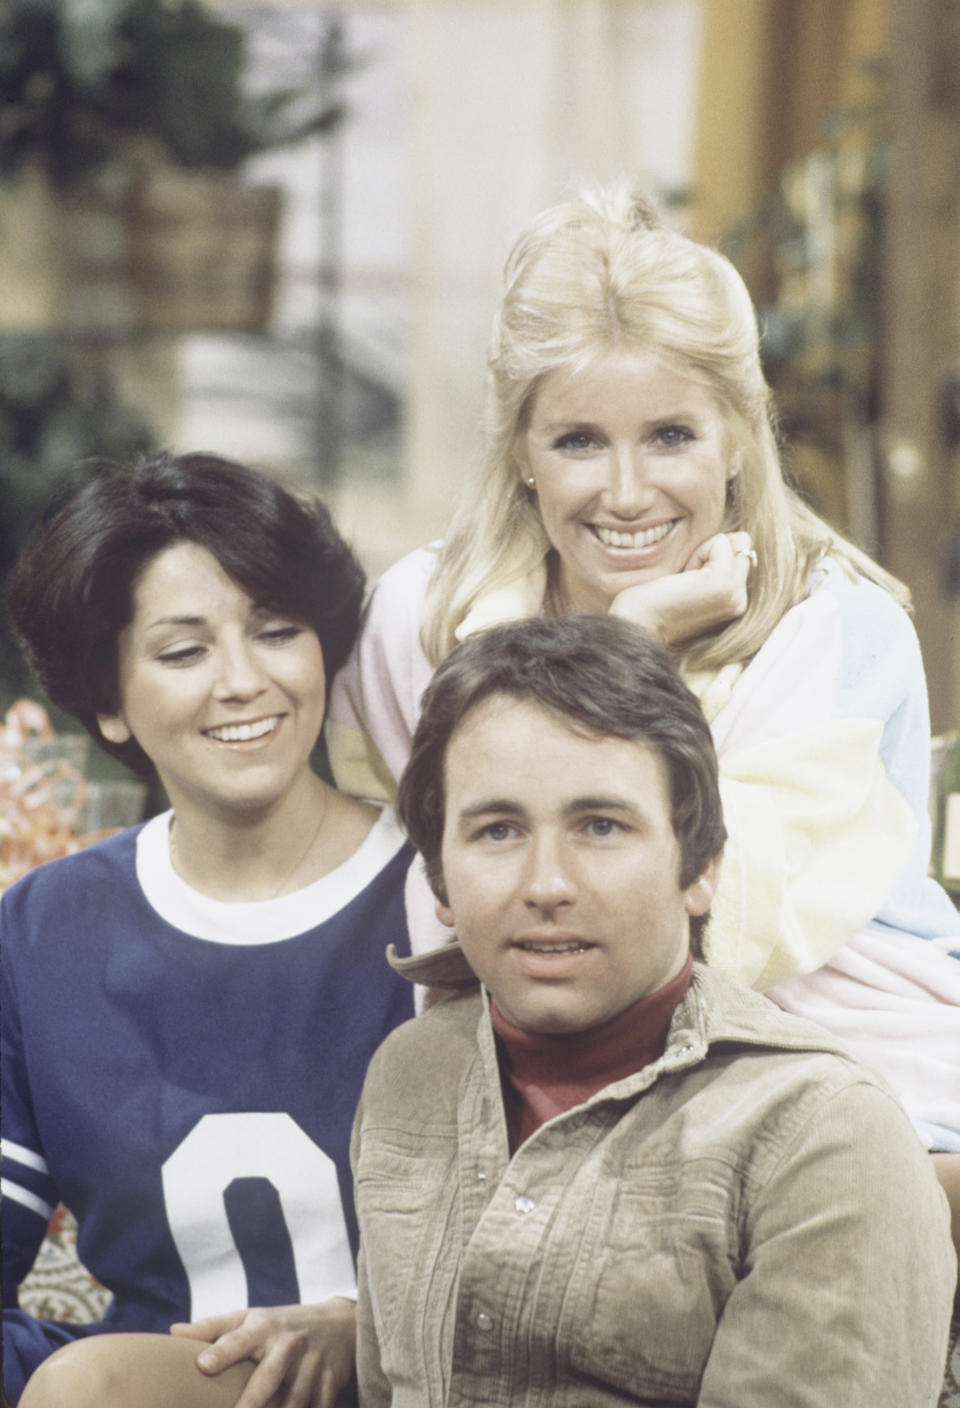 UNITED STATES - SEPTEMBER 12:  THREE'S COMPANY - gallery - Season One - 3/15/77, Joyce DeWitt (as Janet Wood), John Ritter (as Jack Tripper) and Suzanne Somers (as Chrissy Snow) played roommates.,  (Photo by Walt Disney Television via Getty Images Photo Archives/Walt Disney Television via Getty Images)